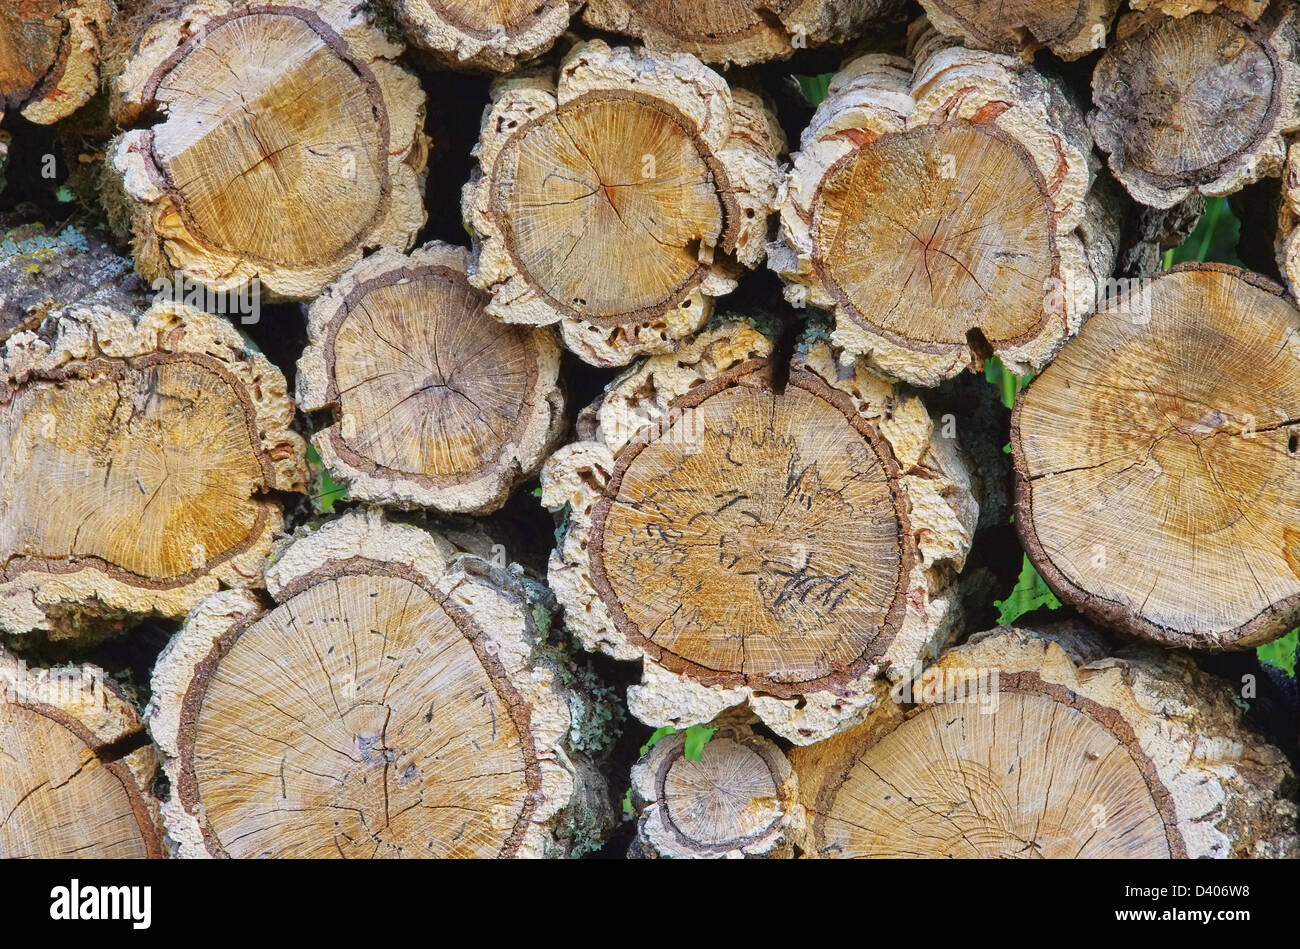 Holzstapel Korkeiche - stack of wood from cork oak 03 Stock Photo